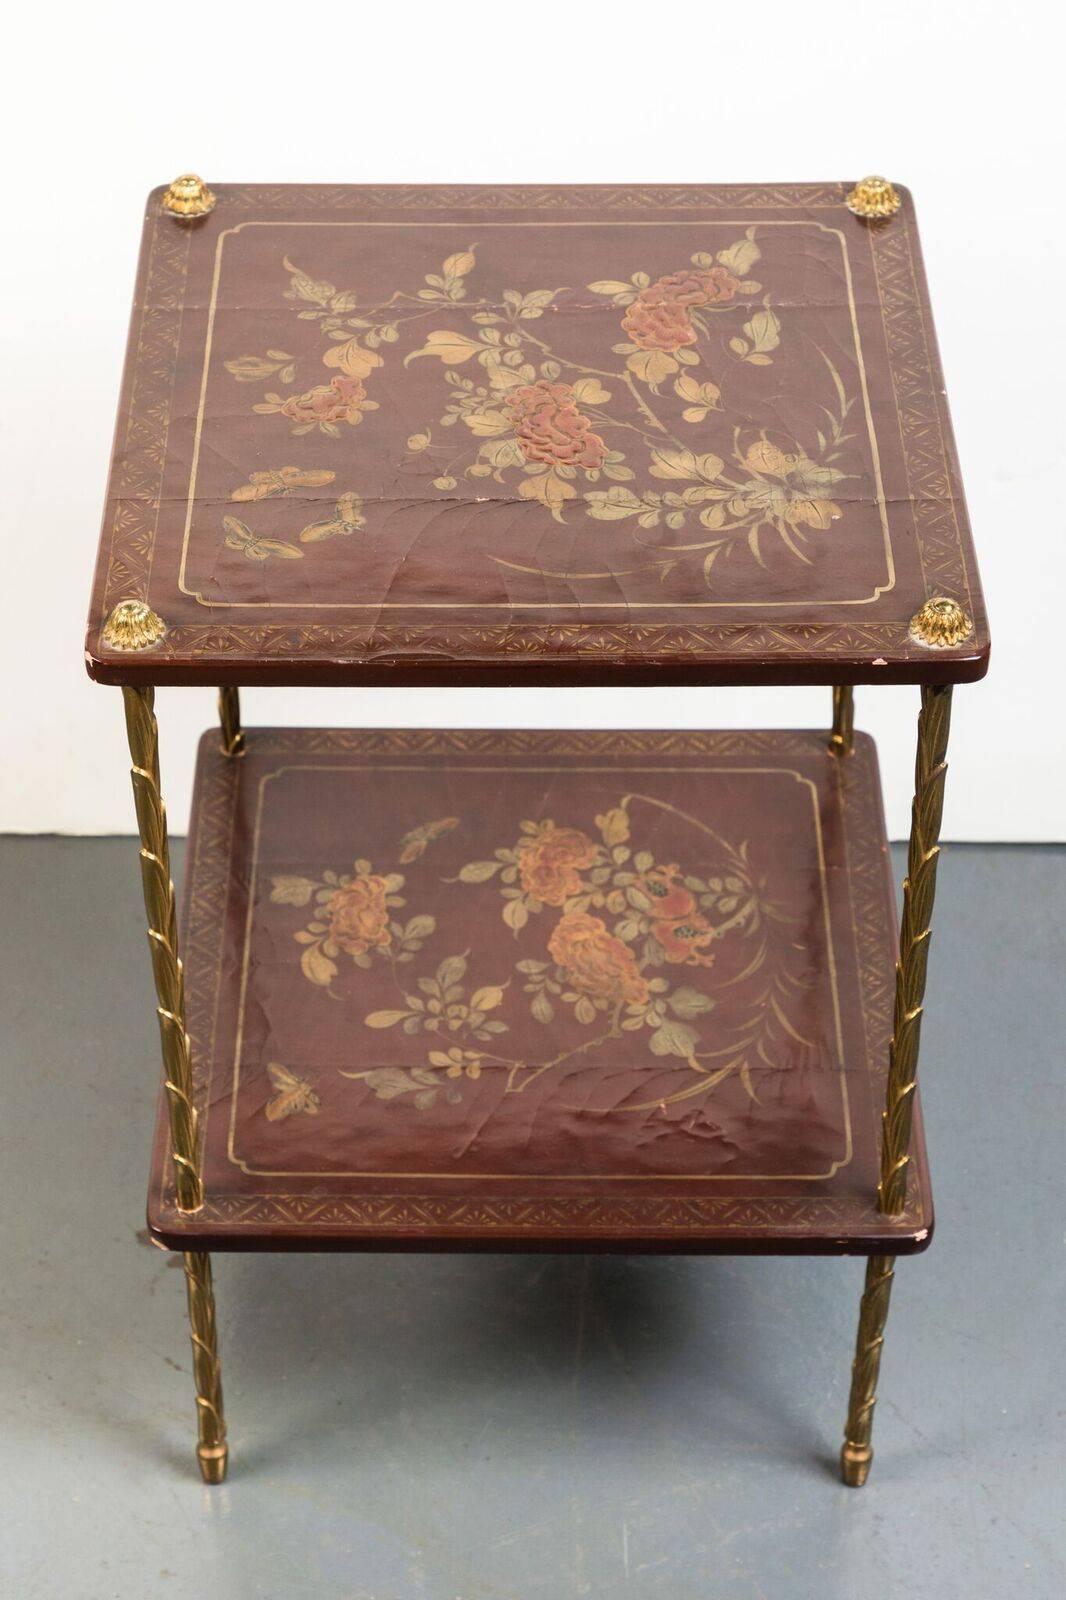 English Petite, circa 1900, Chinoiserie Occasional Tables